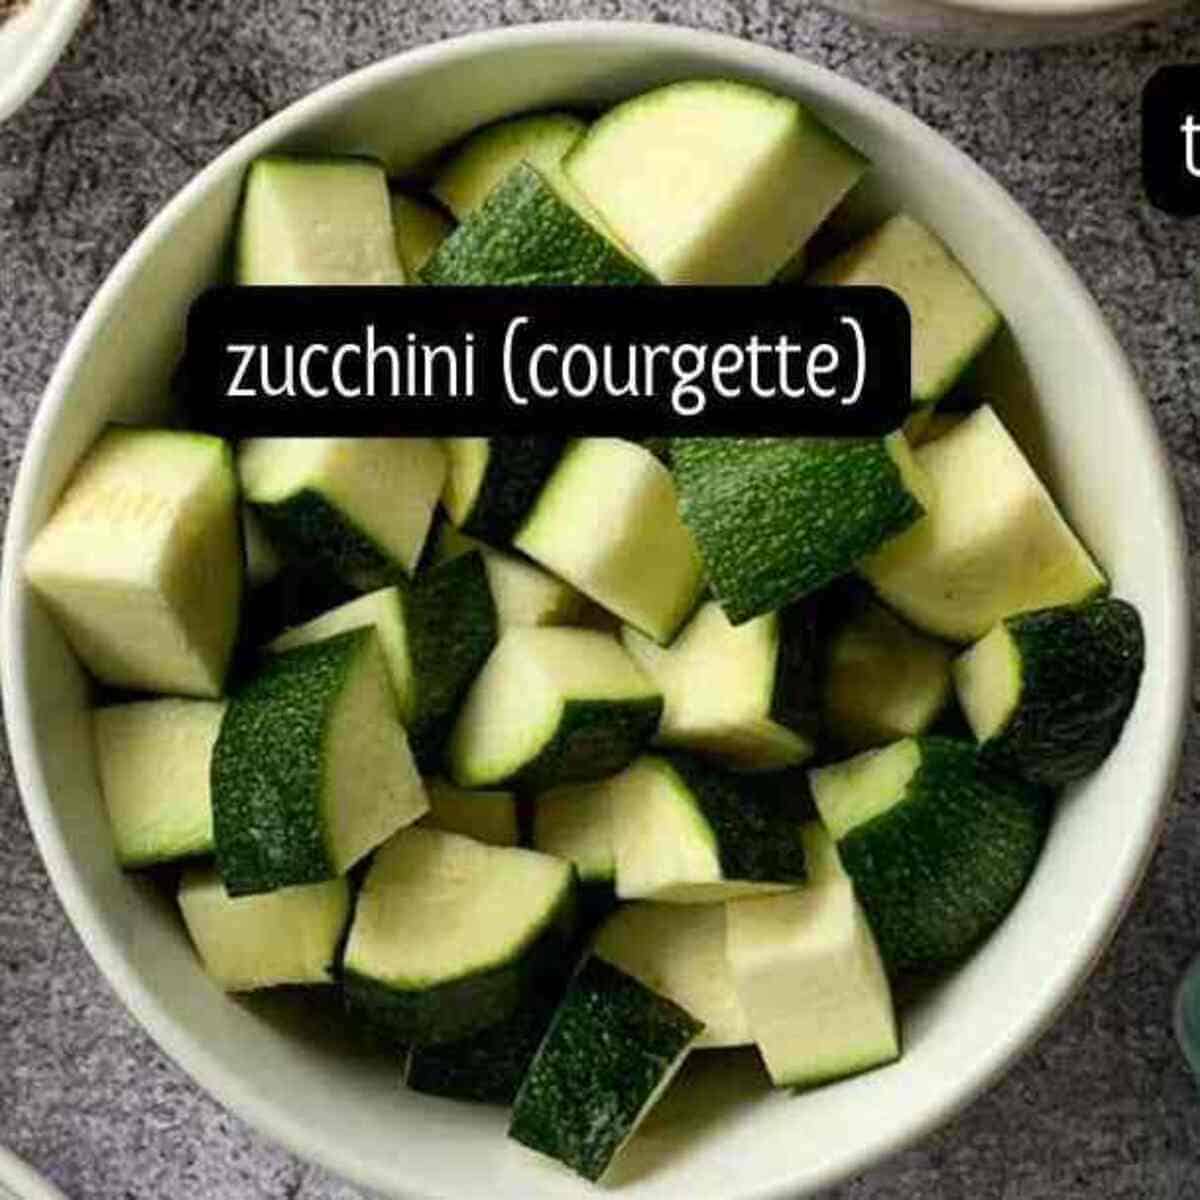 Diced zucchini placed in a white round bowl.